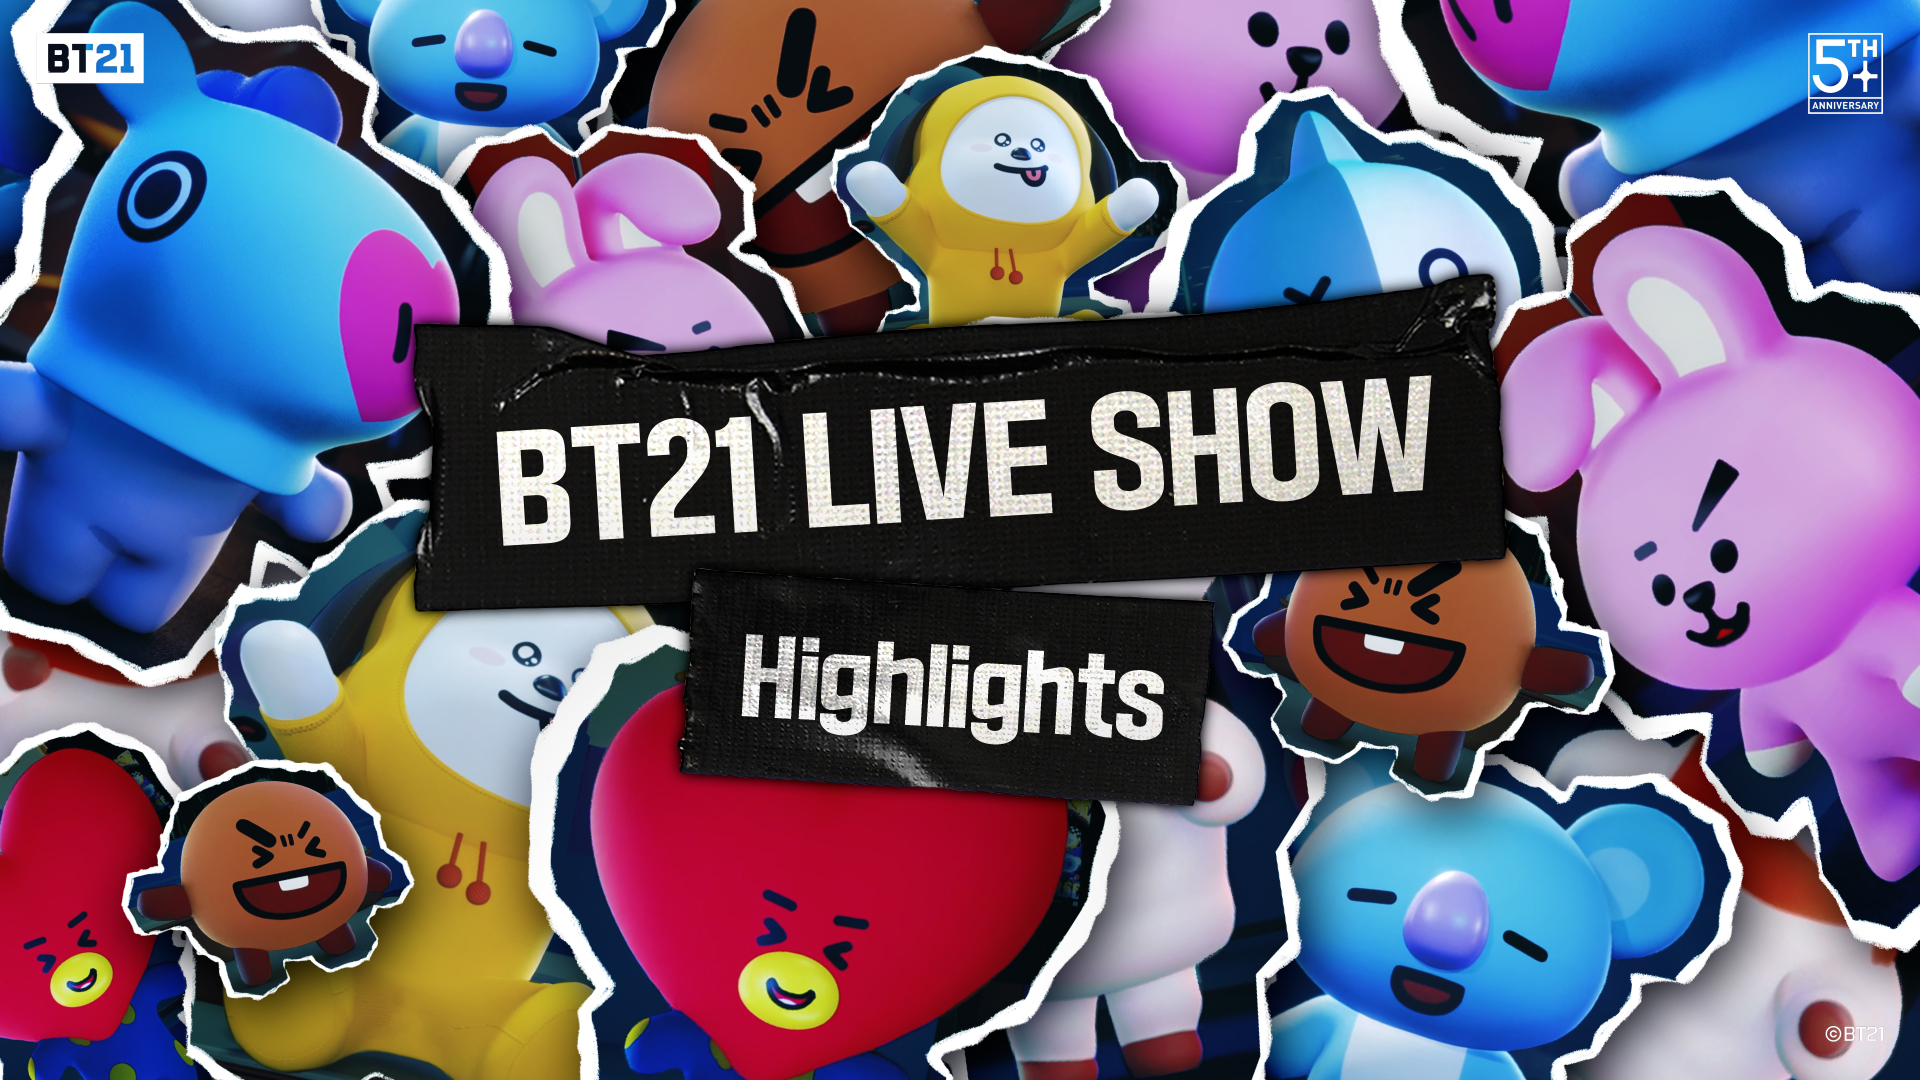 BT21 LIVE SHOW Highlights | MUST-SEE Moments